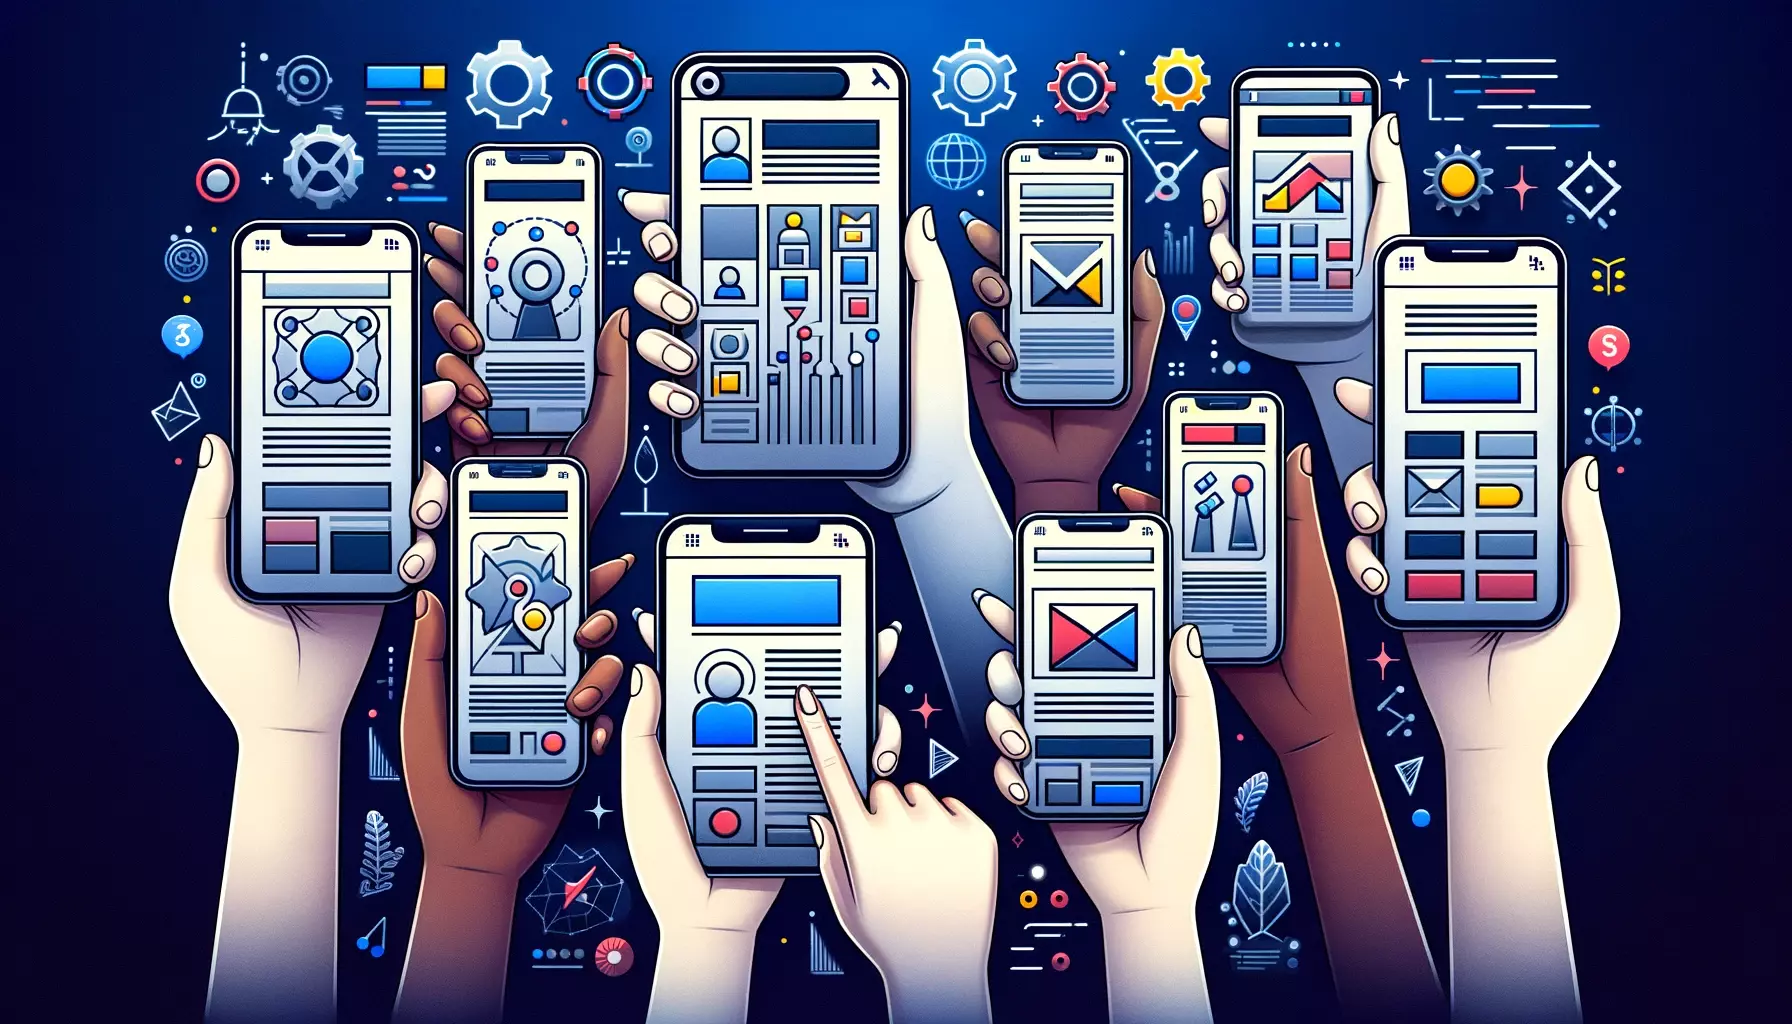 Illustration of many hands holding mobile phones